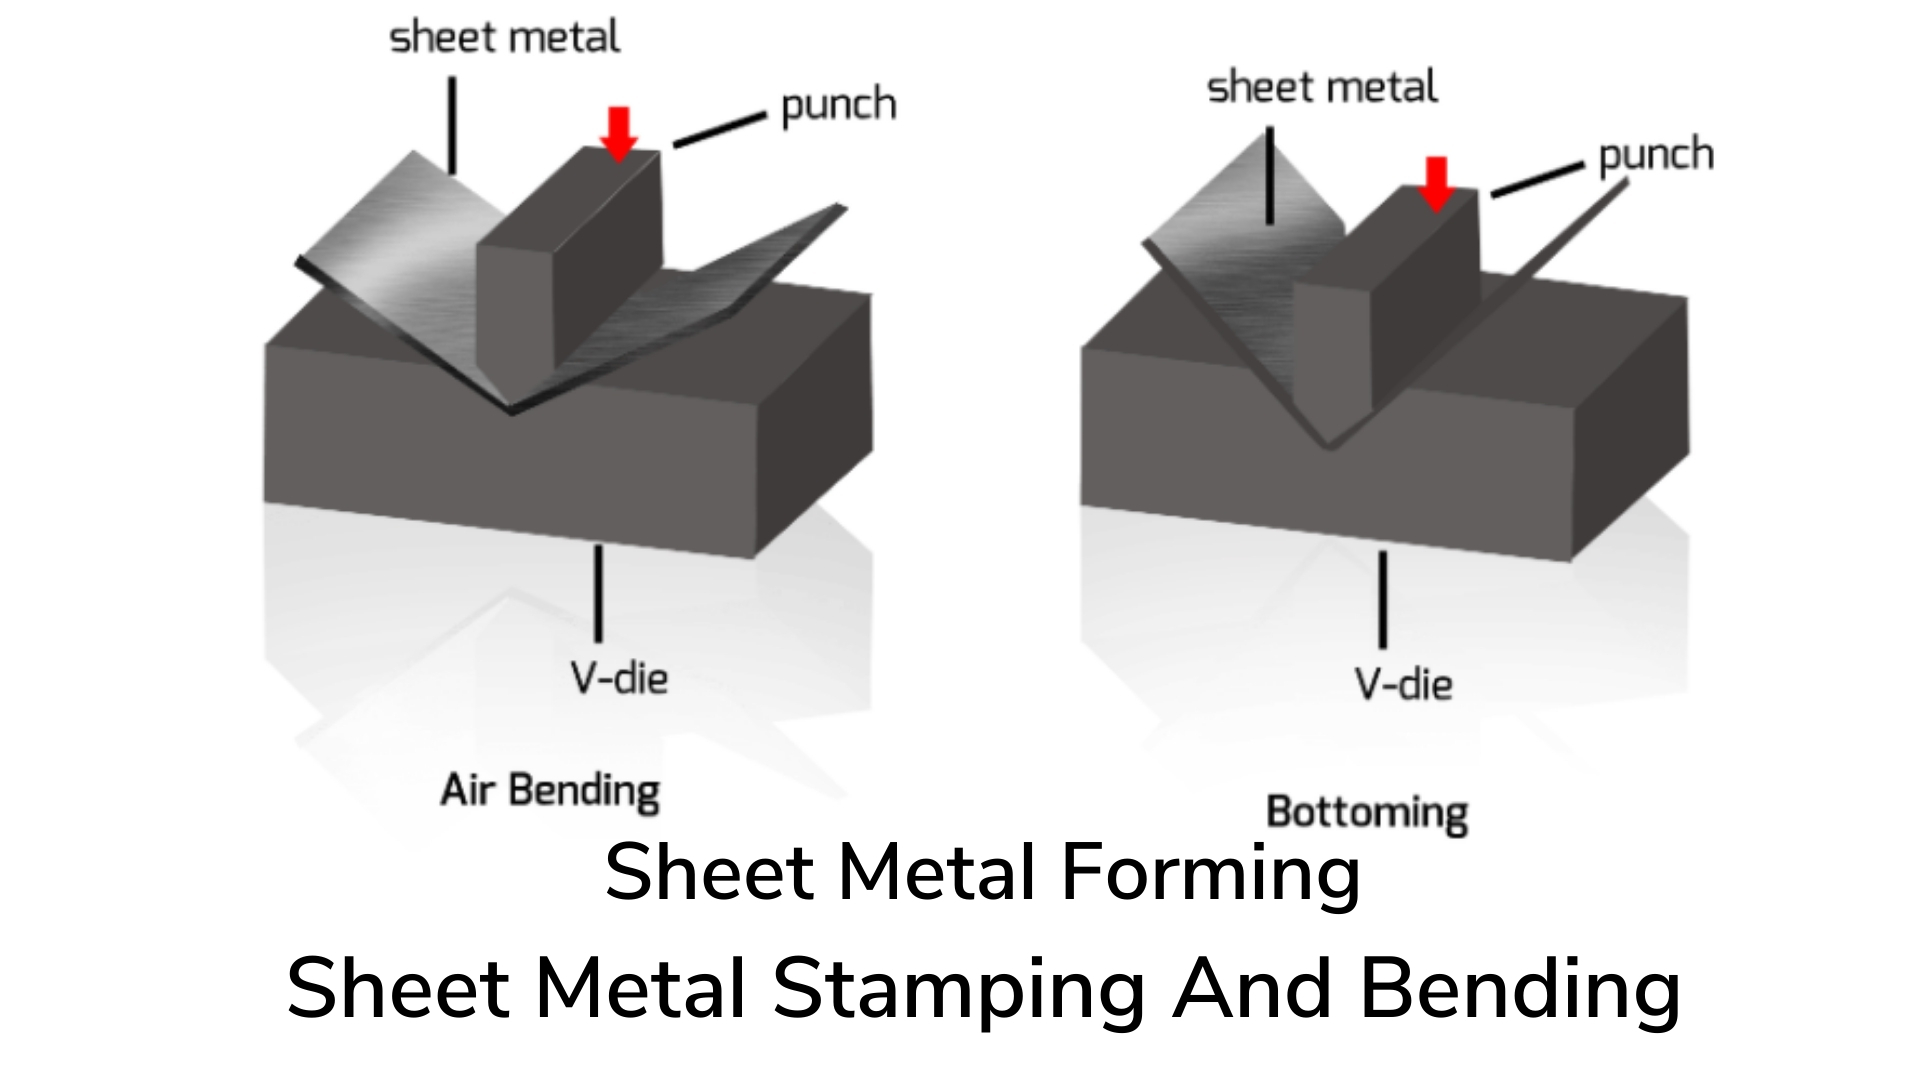 die-female-and-punch-male-in-sheet-metal-stamping